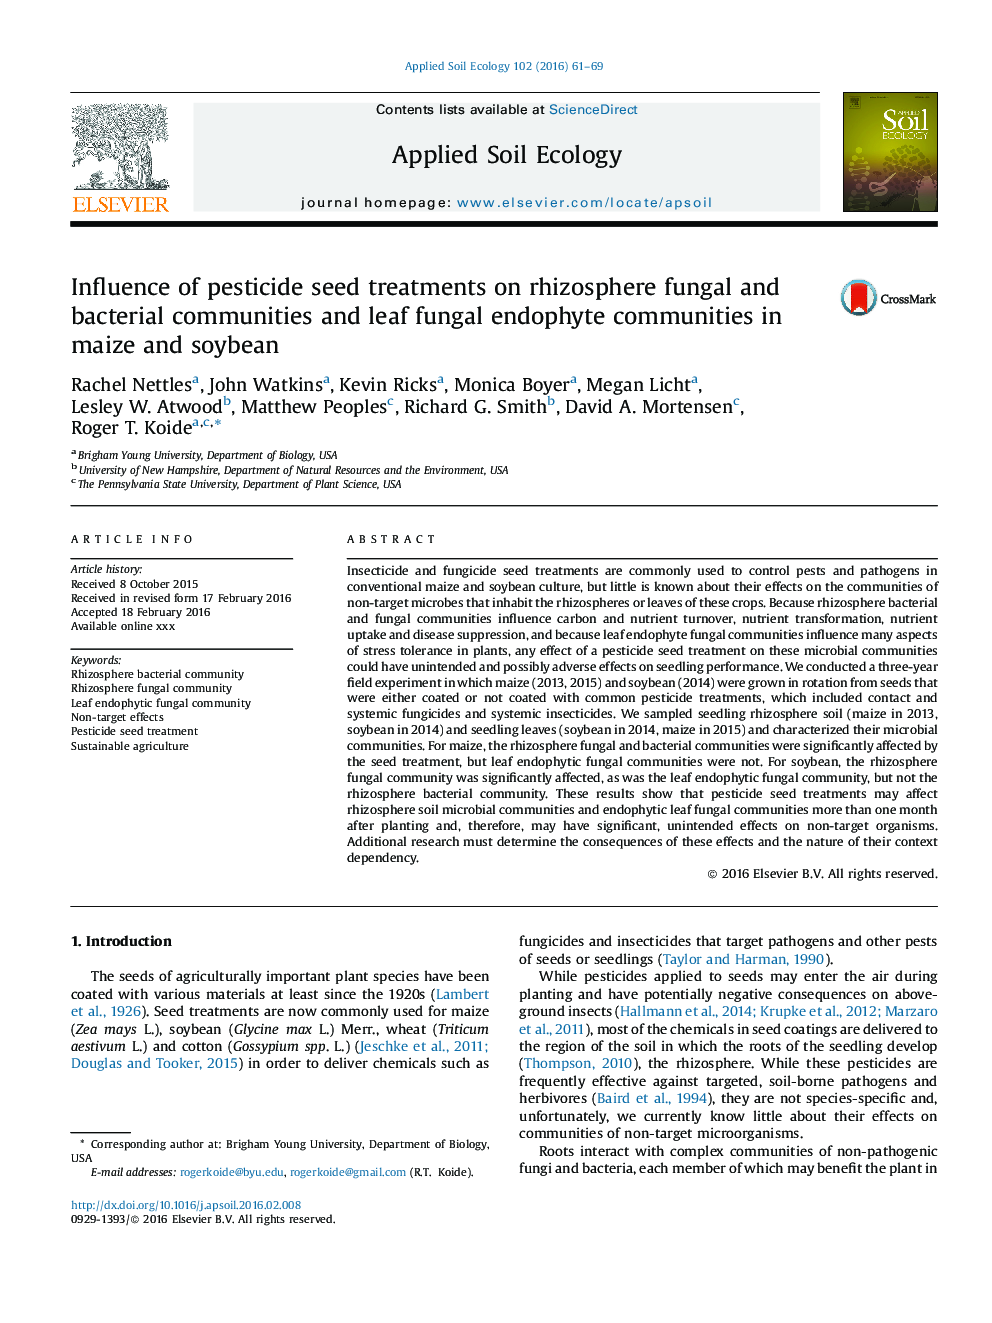 Influence of pesticide seed treatments on rhizosphere fungal and bacterial communities and leaf fungal endophyte communities in maize and soybean